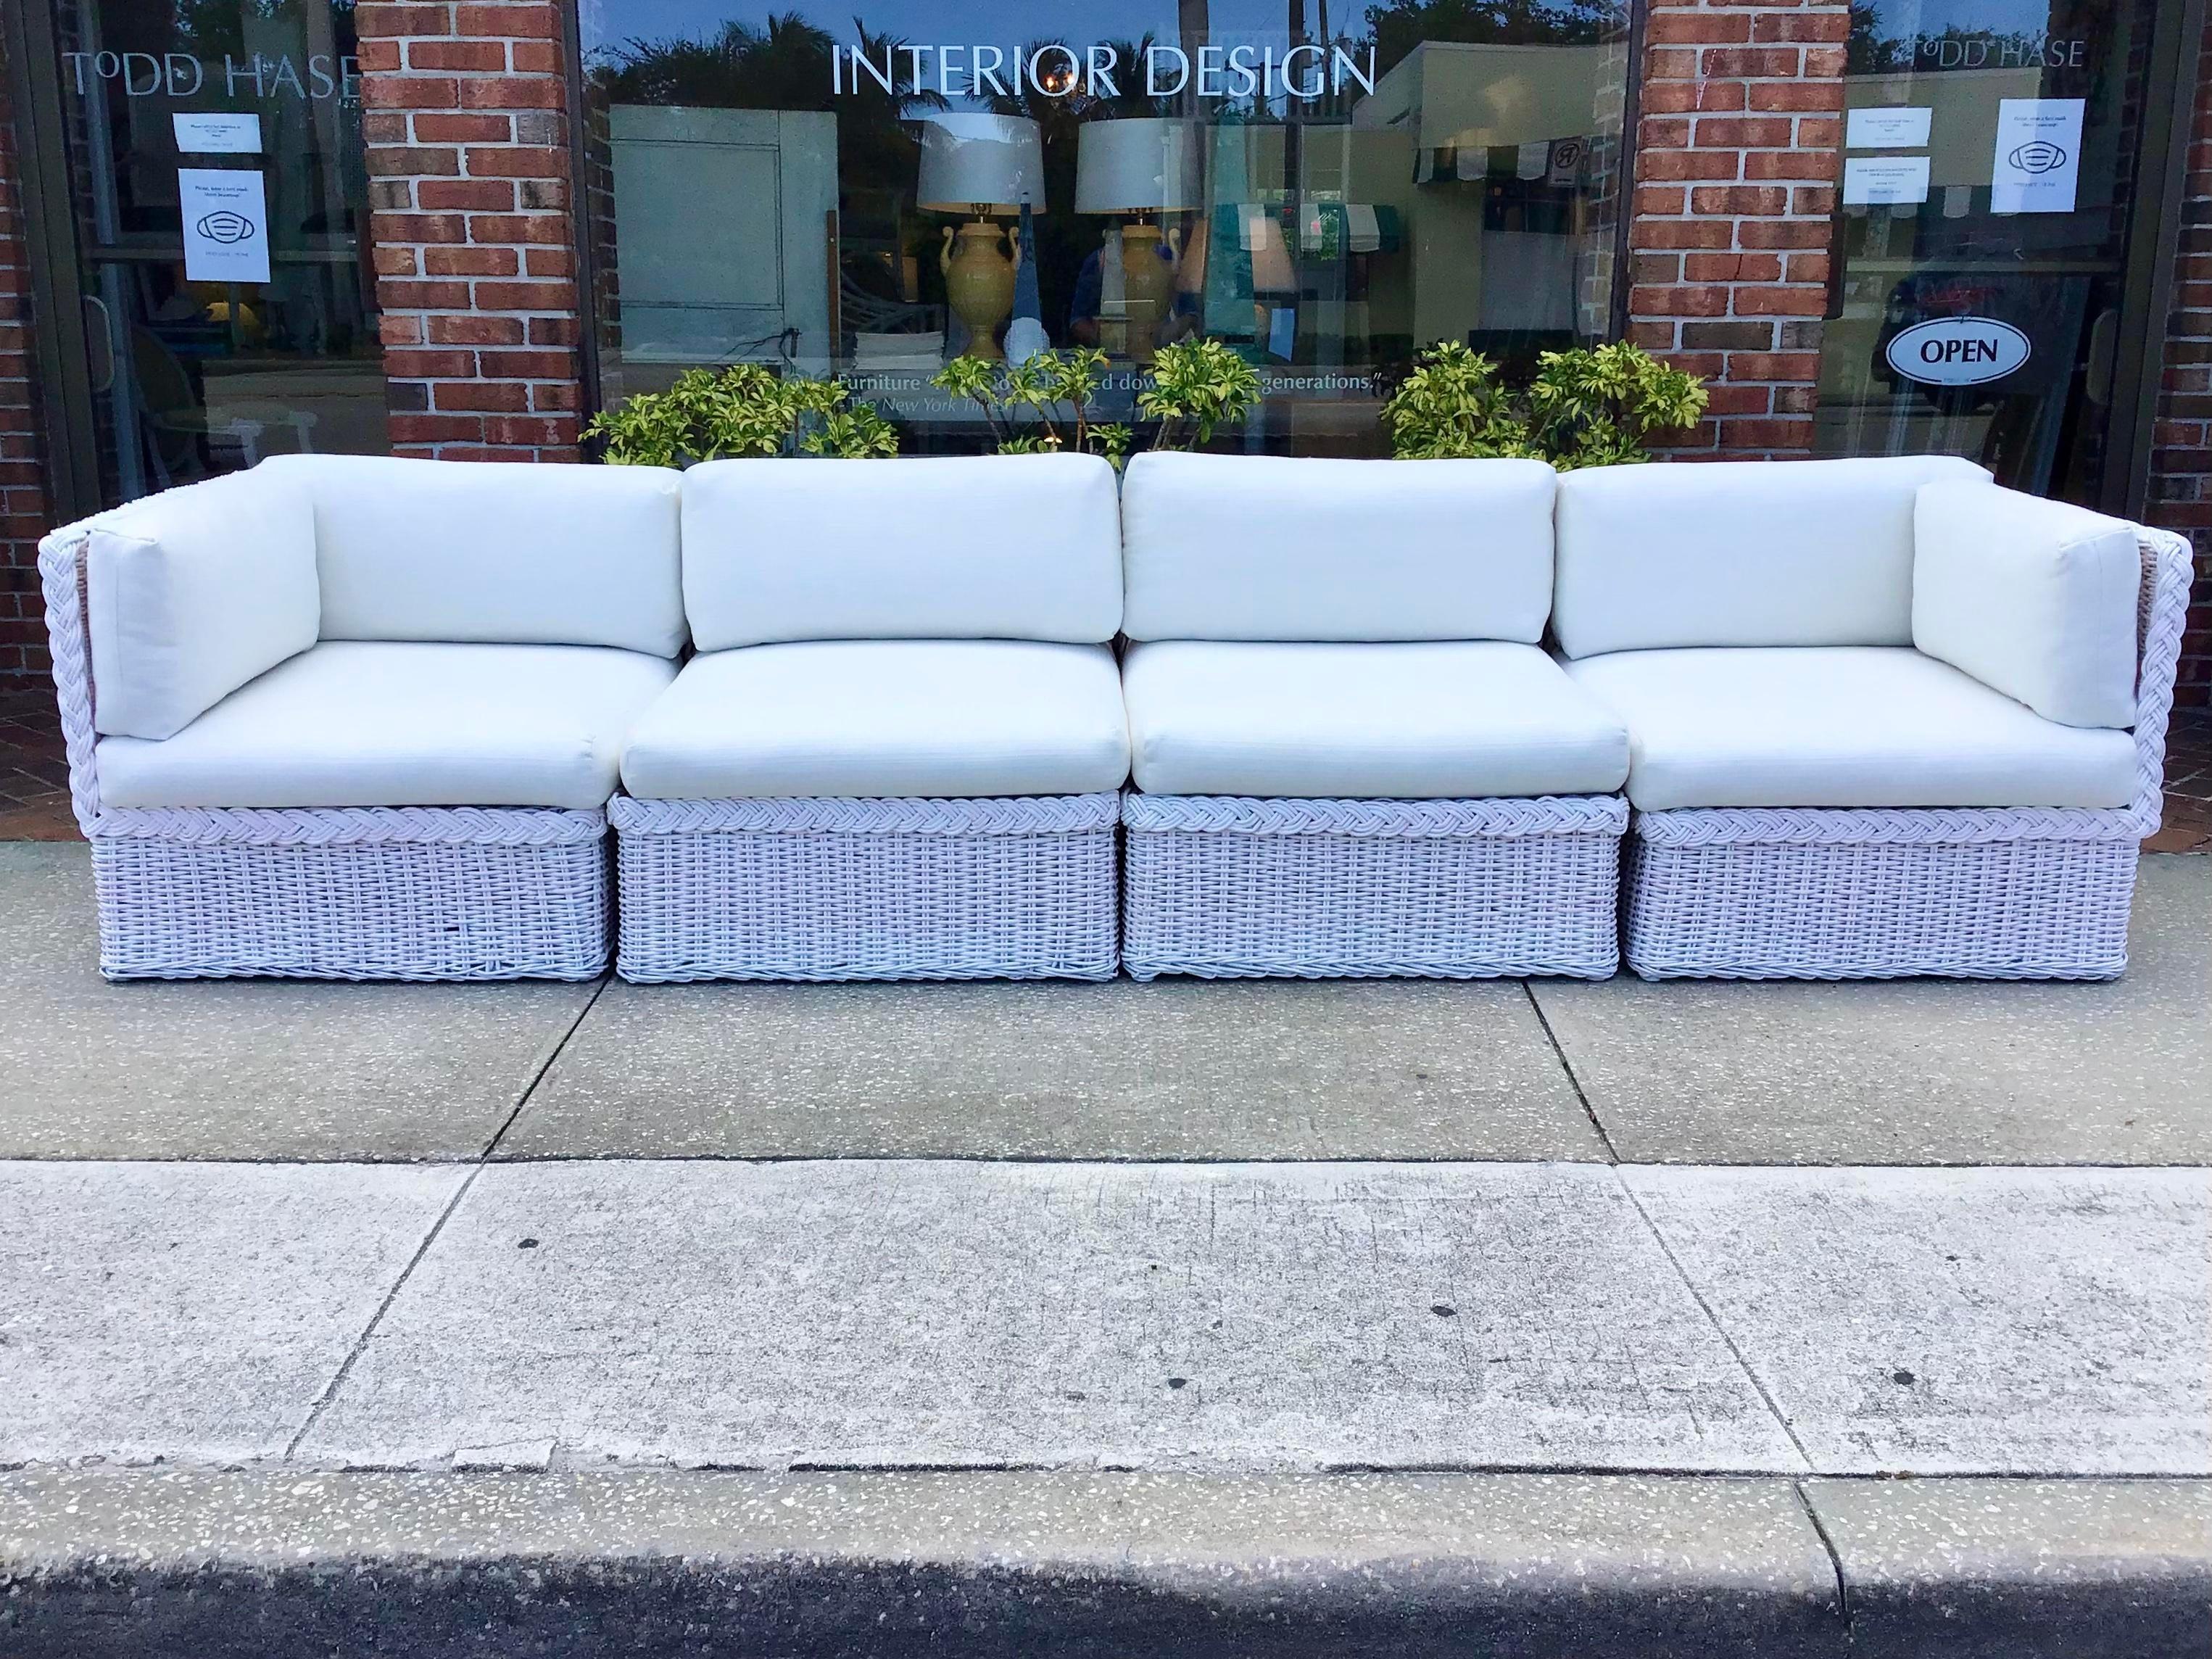 Fantastic Bielecky Brothers newly lacquered and upholstered Boho Chic rattan four piece modular sectional. All new Todd Hase Upholstery and Todd Hase Textiles High Performance White. So much flexibility with this classic design. Use it as a long